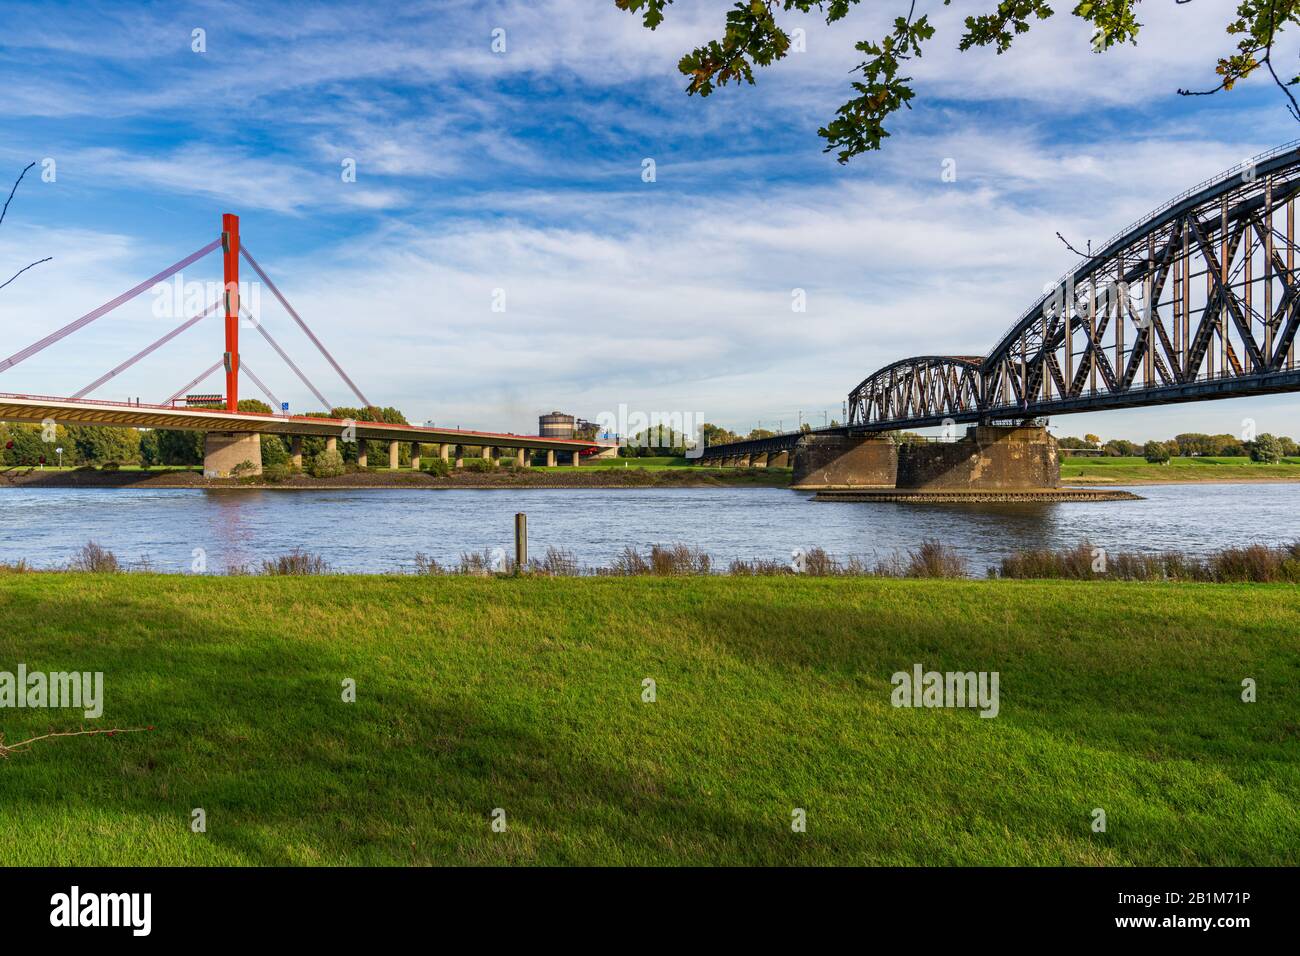 Duisburg, North Rhine-Westfalia, Germany - October 26, 2019: View at the River Rhine in Duisburg-Baerl with the Beeckerwerther Bridge on the left and Stock Photo